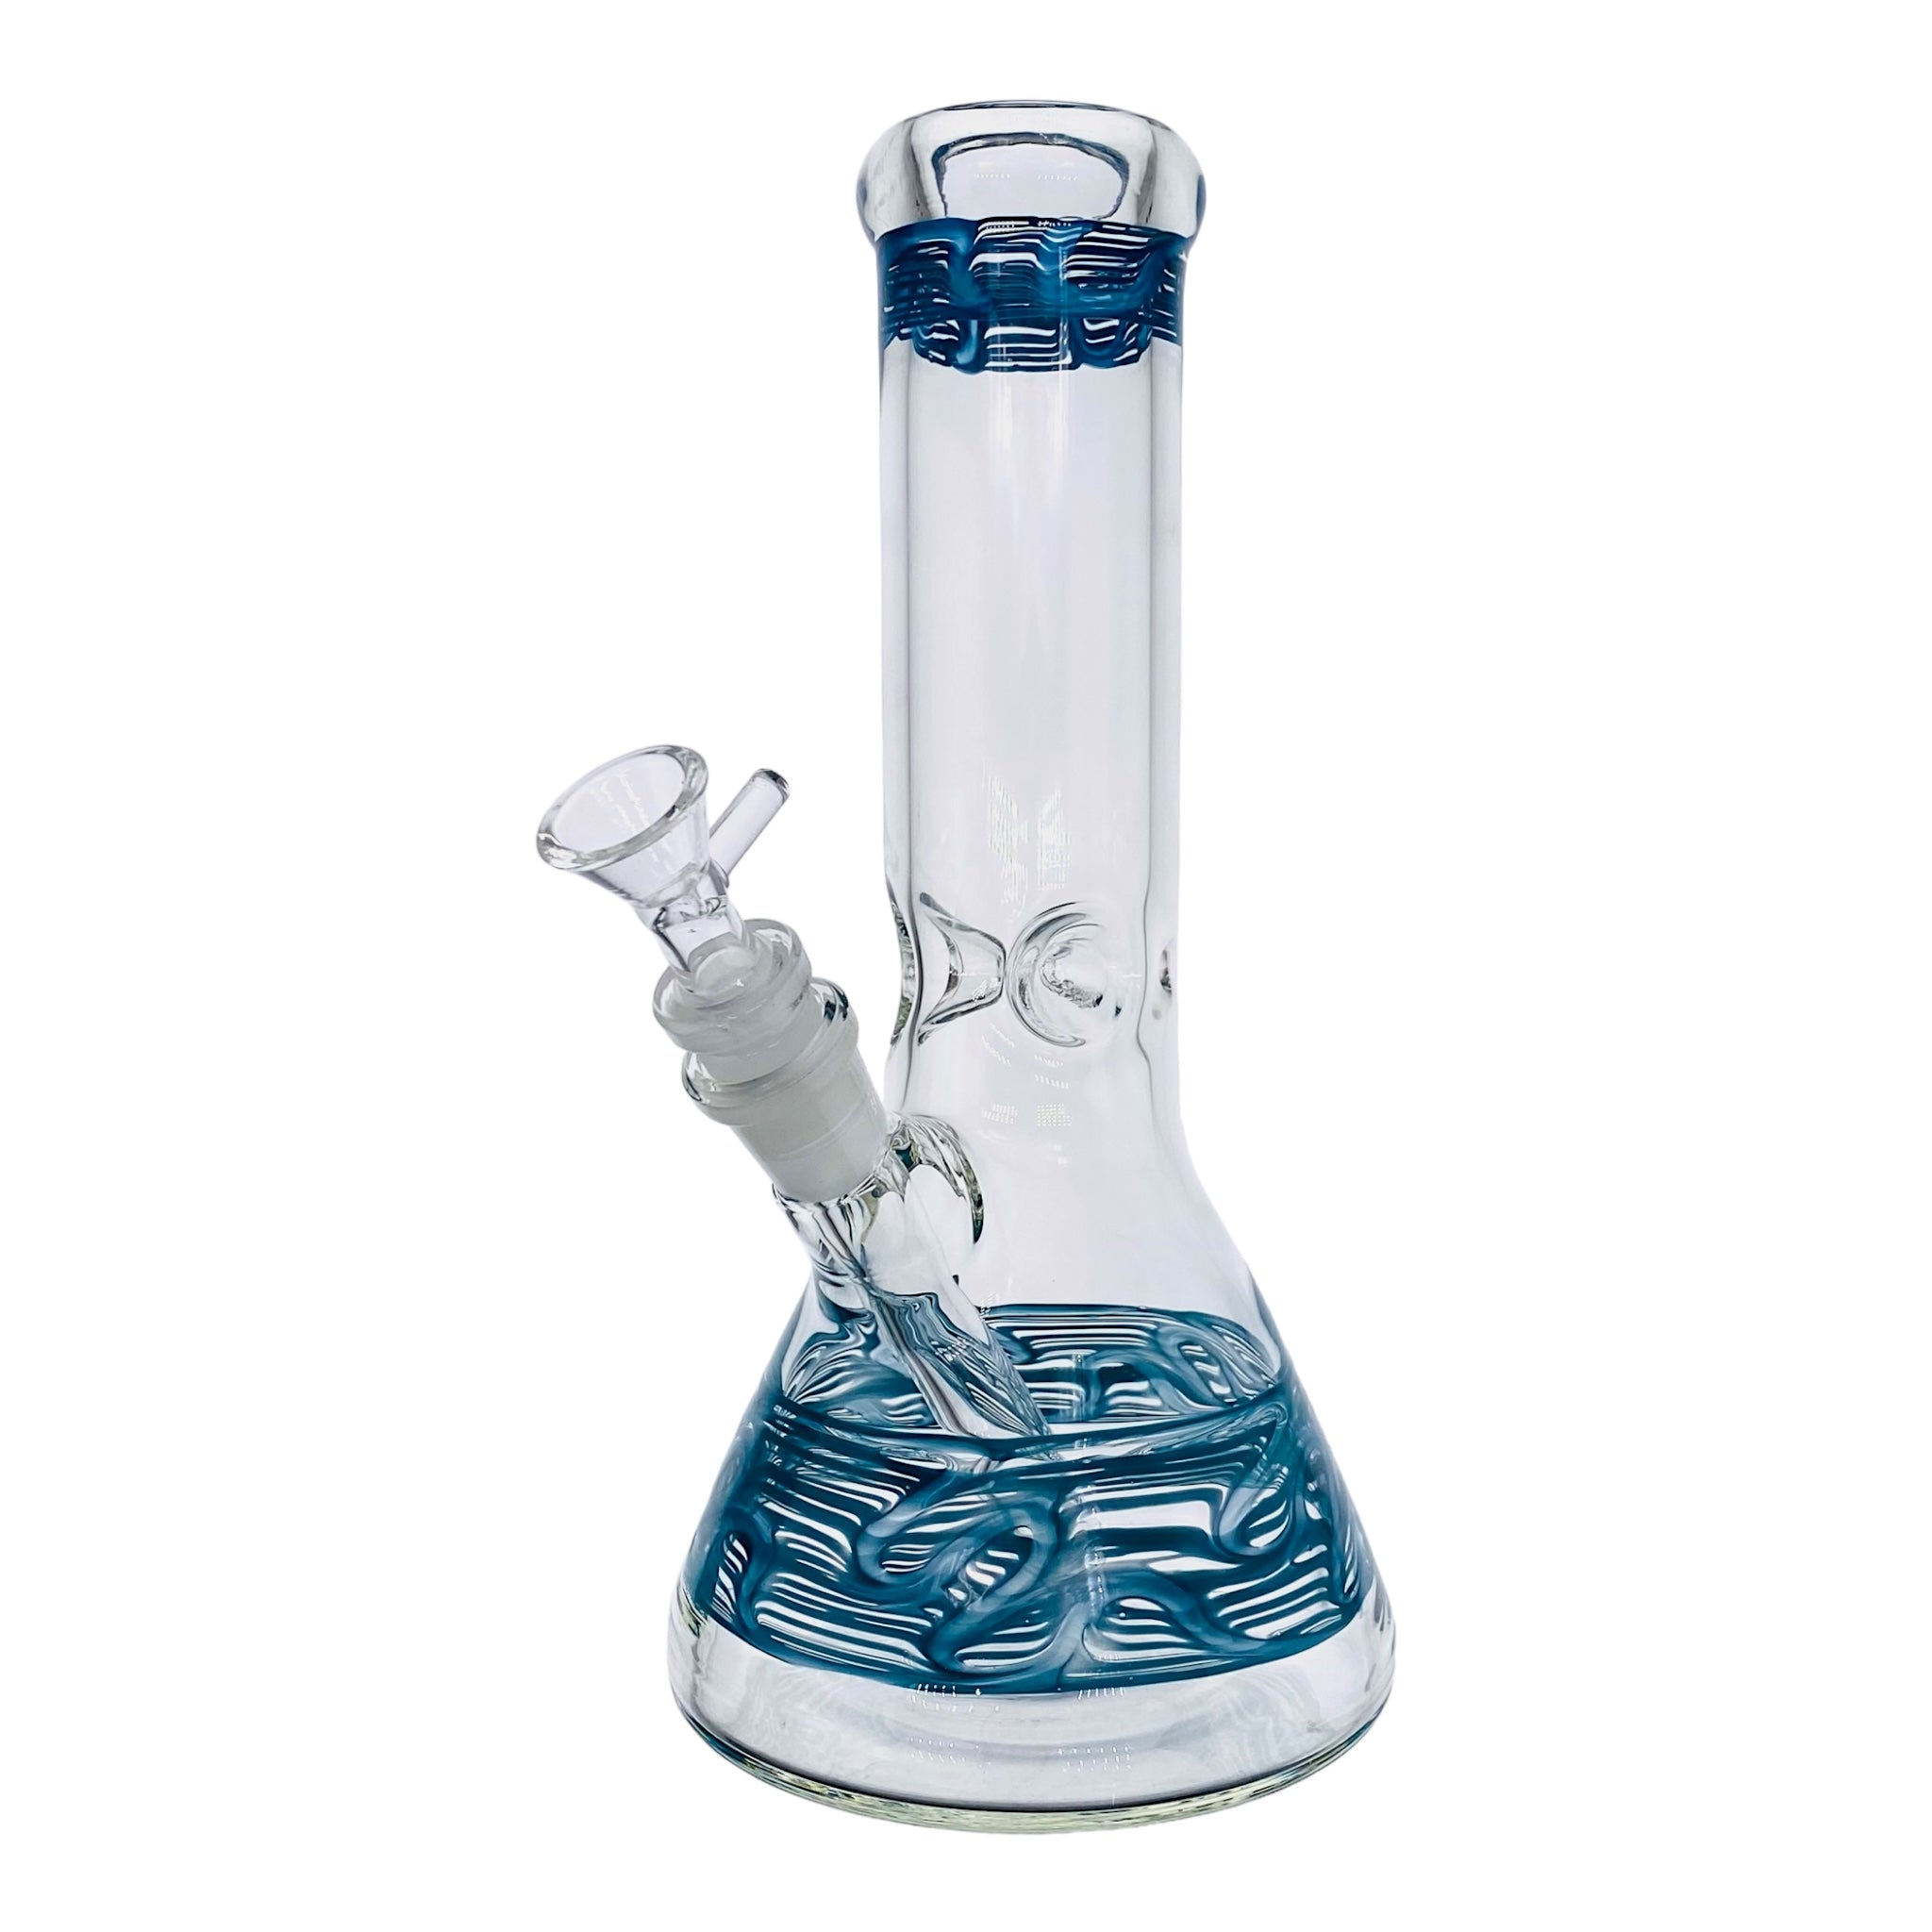 10 Inch Clear Beaker Glass Bong With Teal Wrap And Rake